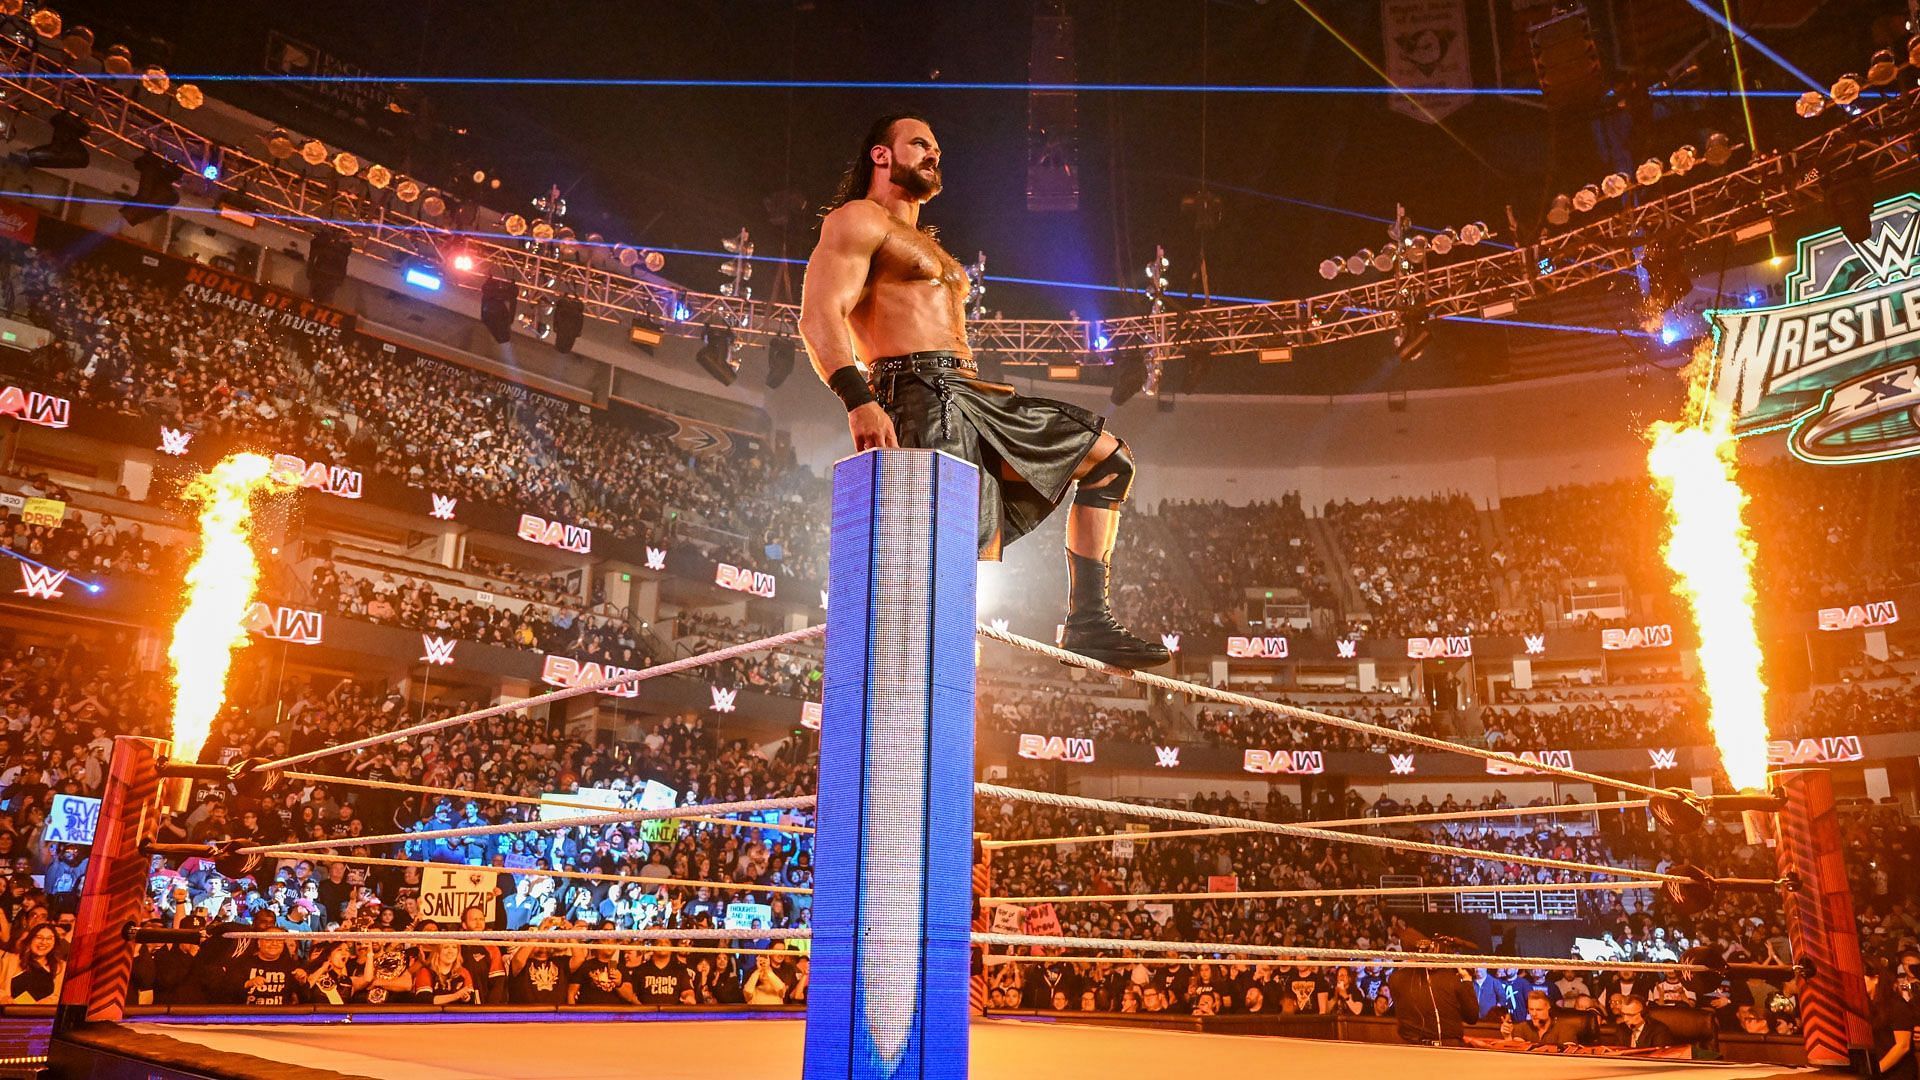 Drew McIntyre stands tall on WWE RAW